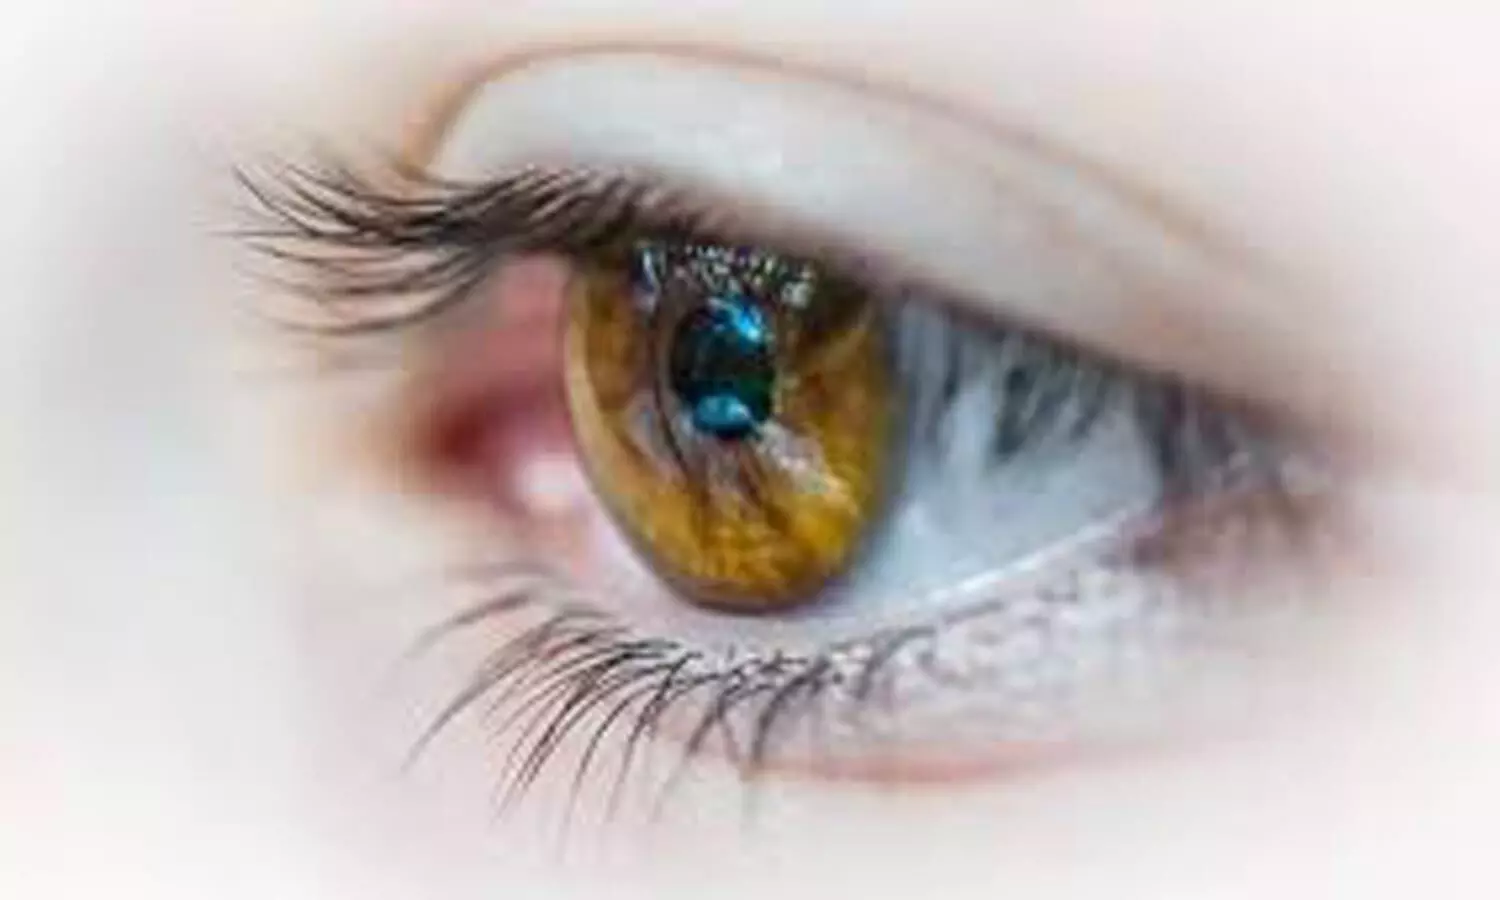 COVID-19 infection may lead to small fiber neuropathy on ocular surface: Study